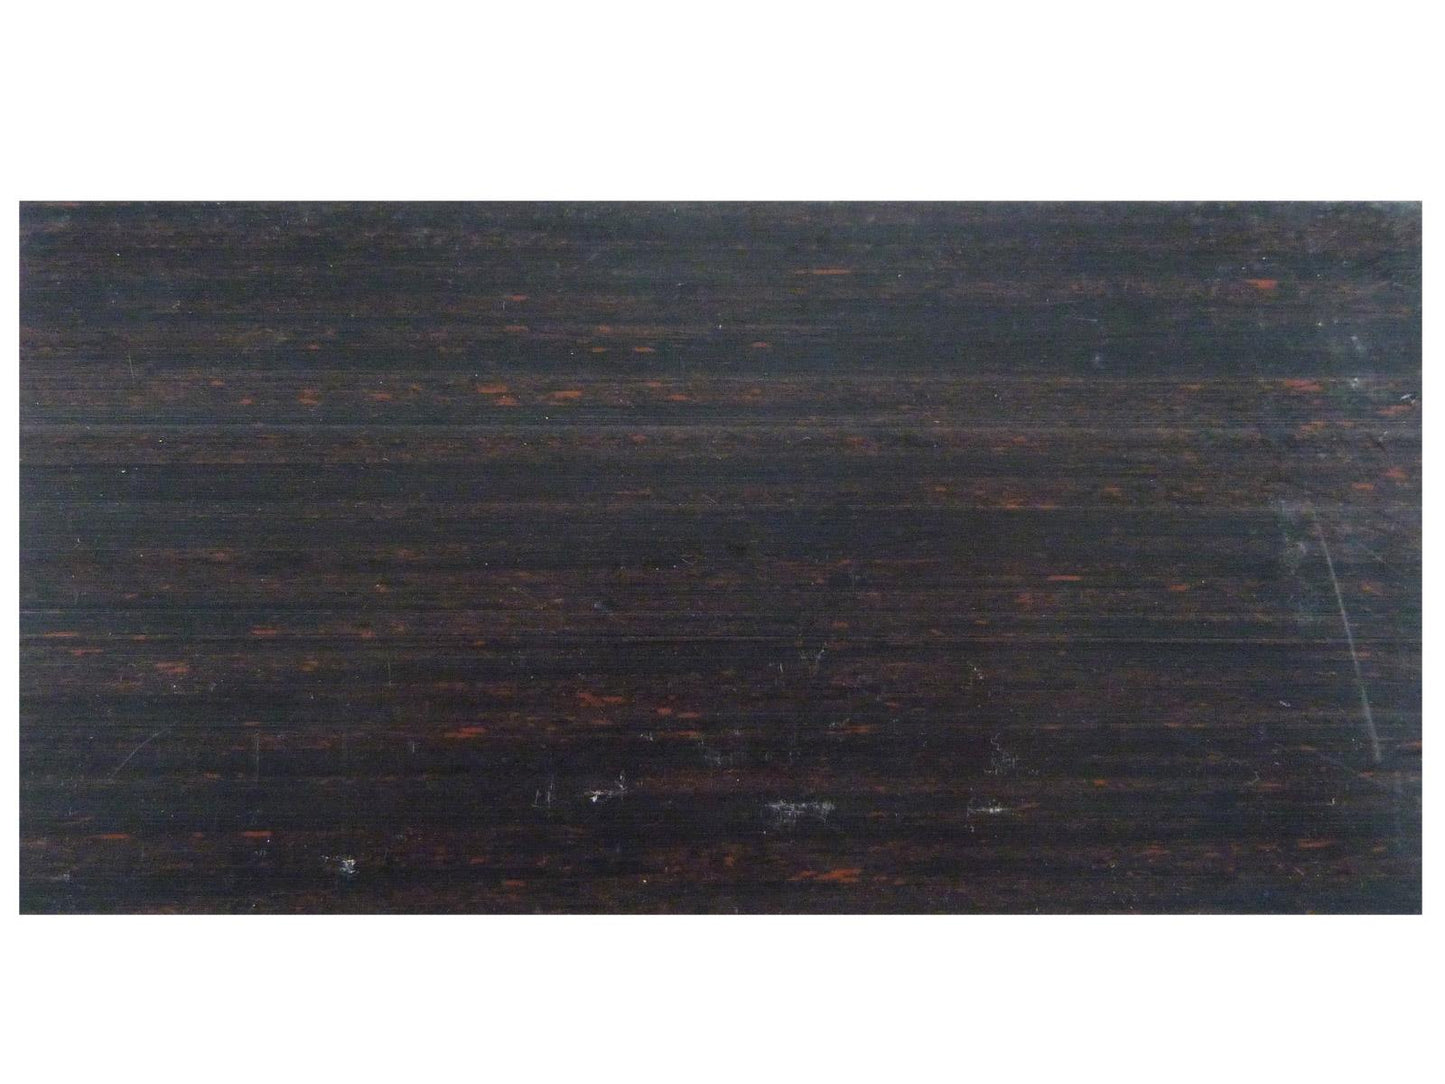 Incudo Rosewood Wood Celluloid Sheet - 200x100x1.5mm (7.9x3.94x0.06")